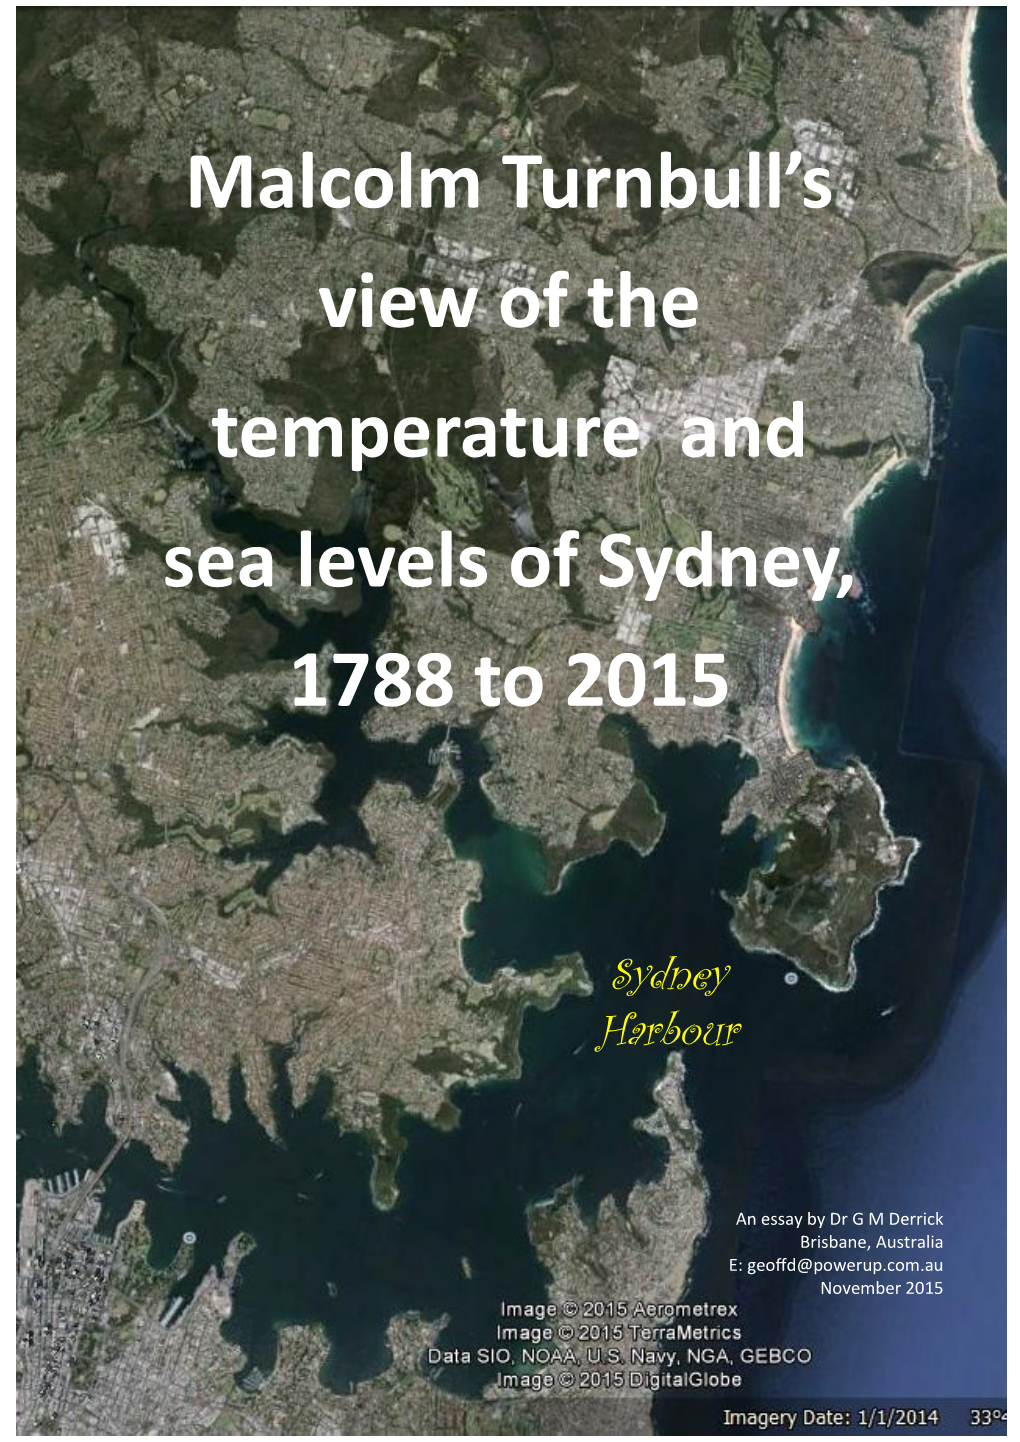 Malcolm Turnbull's View of the Temperature and Sea Levels of Sydney, 1788 to 2015